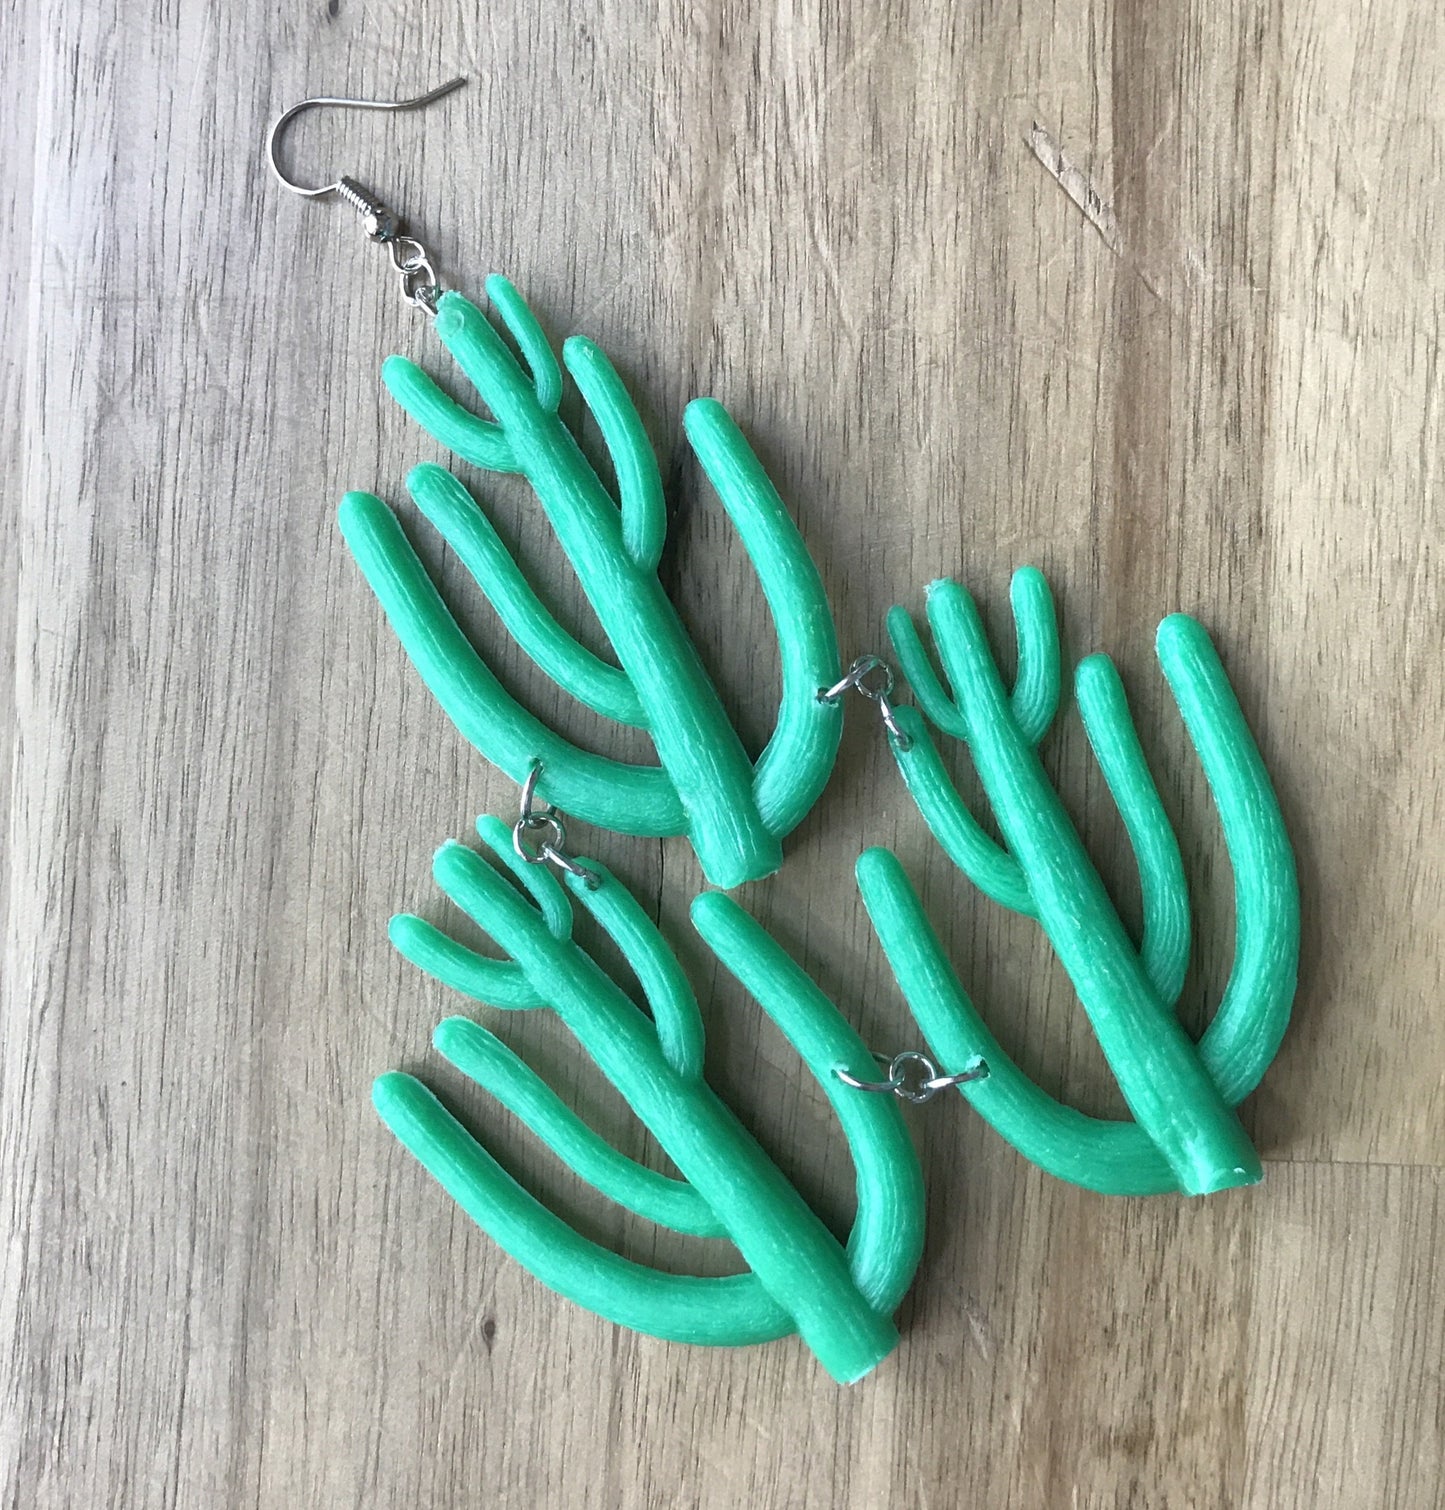 Three plastic cacti are linked by metal rings, for a giant bright earring.